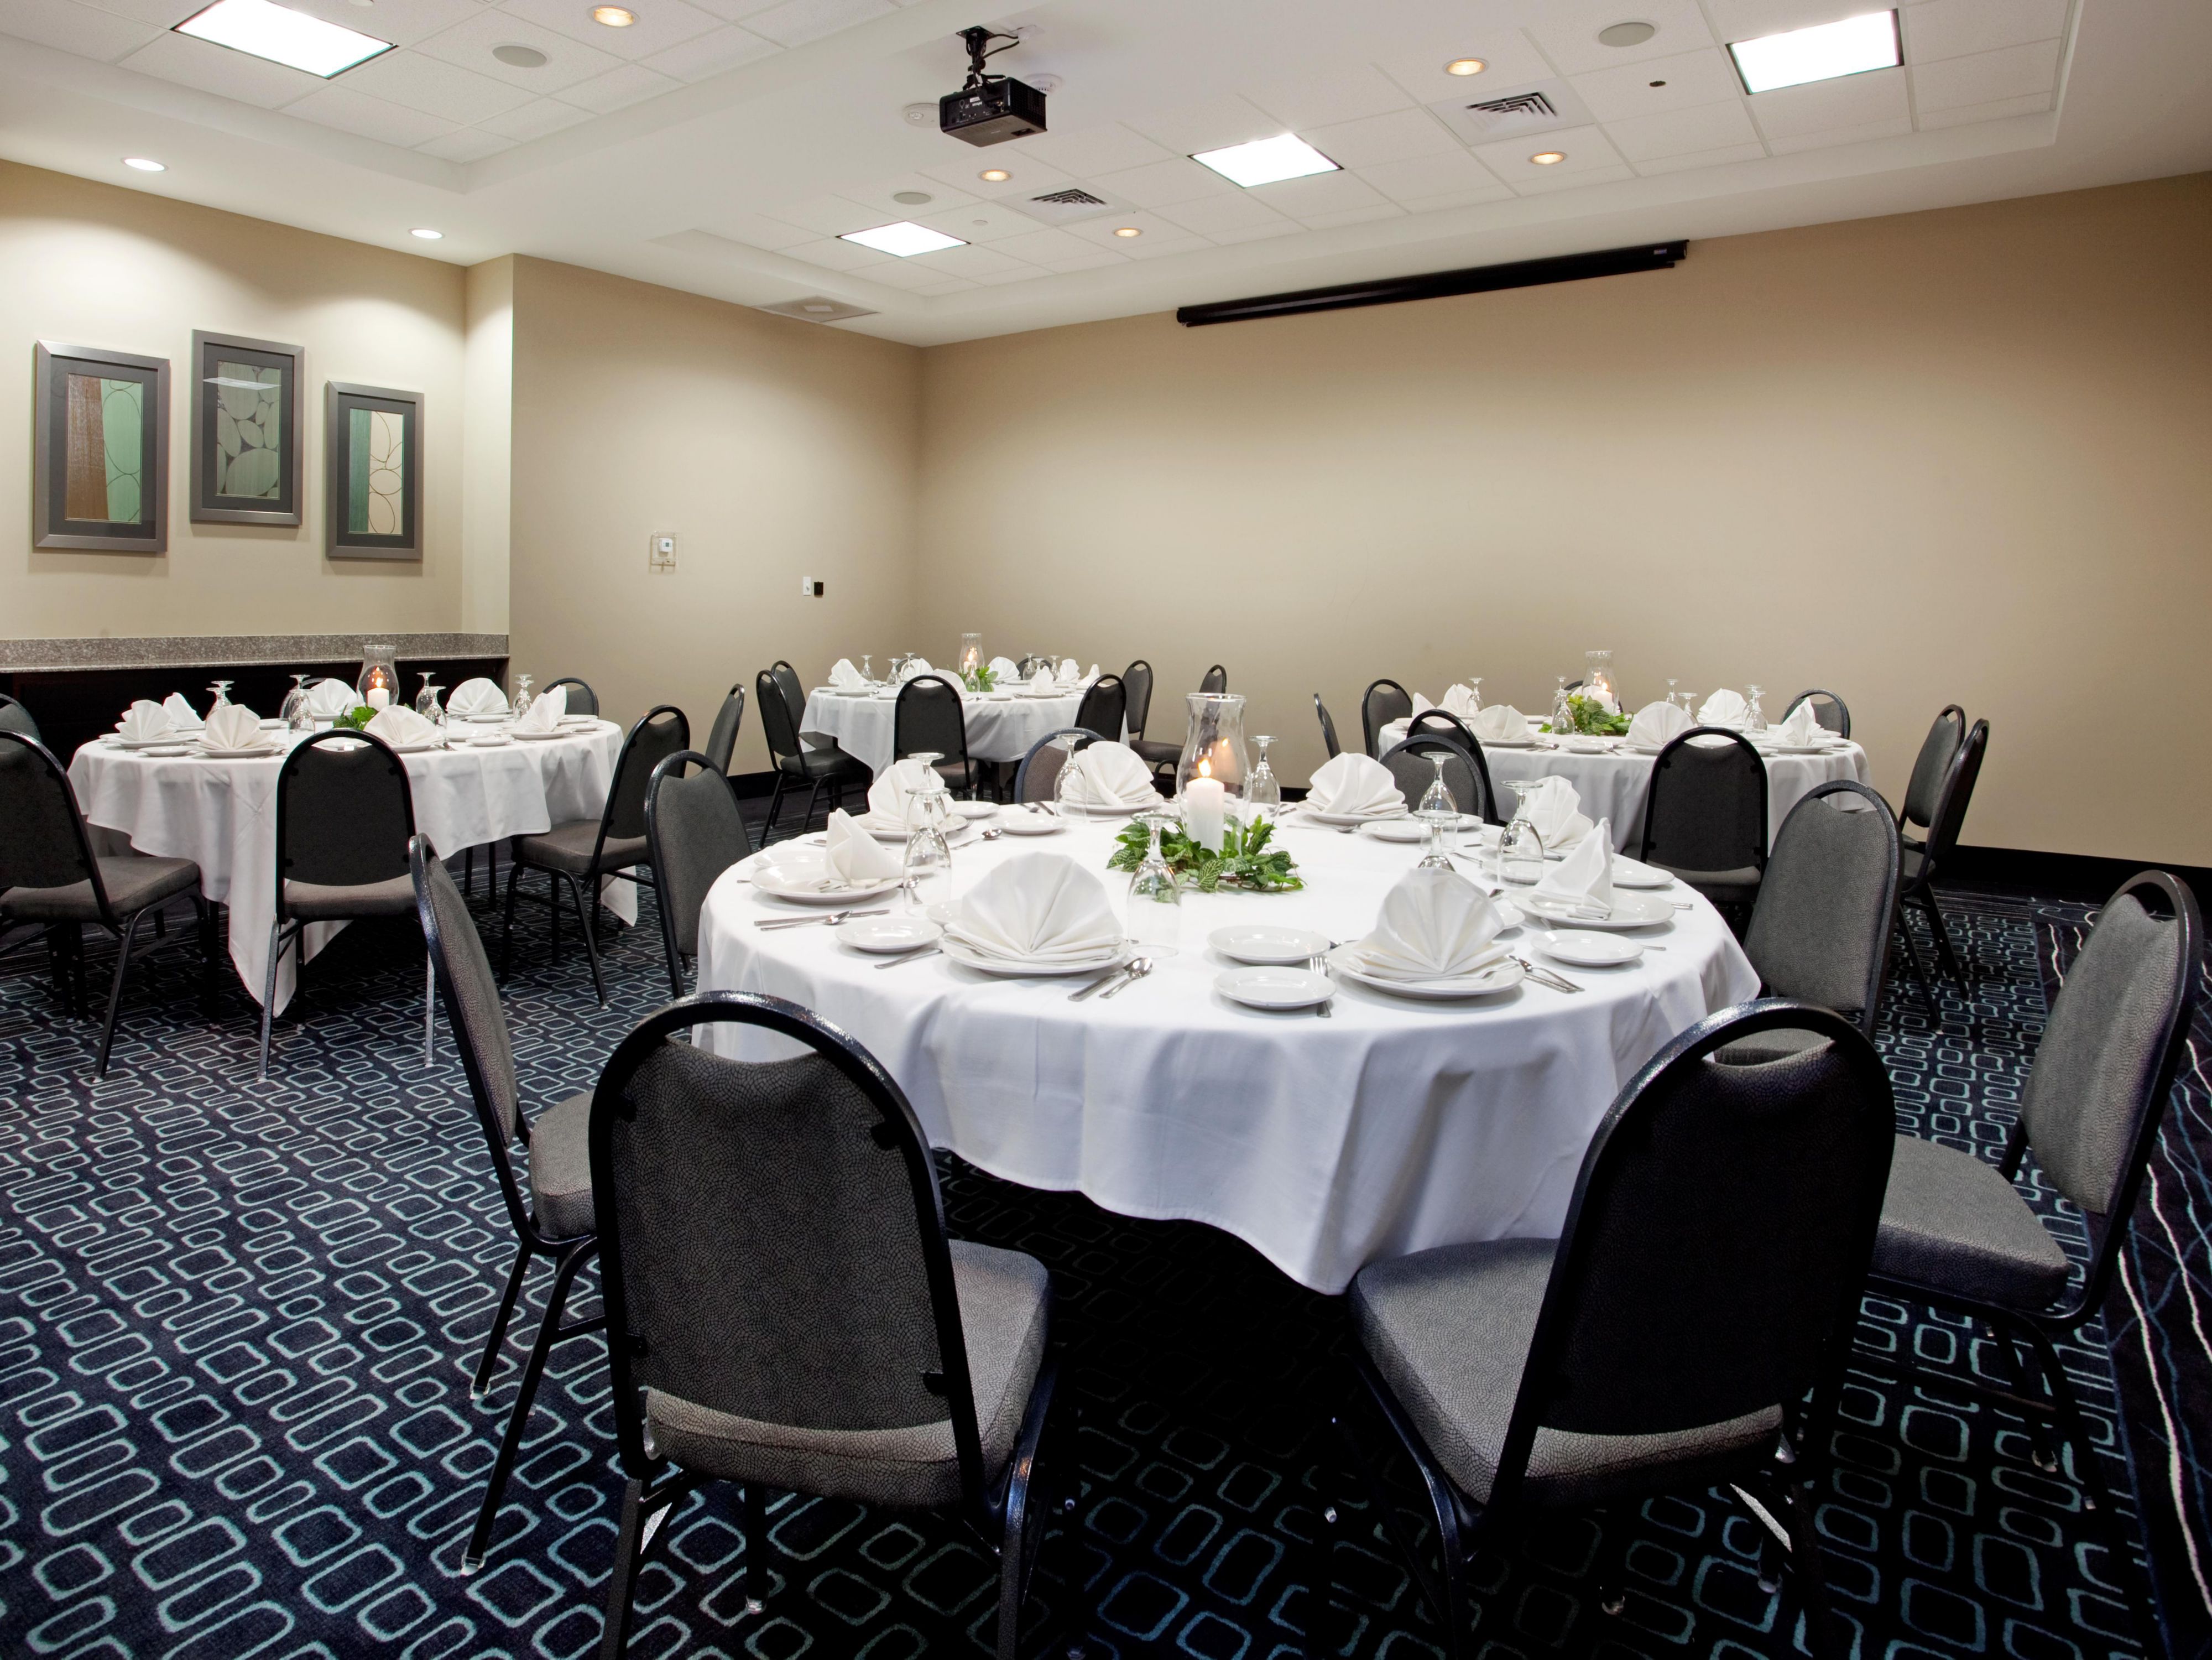 With over 3,000 square feet of flexible space, we can accommodate groups of various sizes. We also offer full catering and audio visual services, so leave all the work to us!